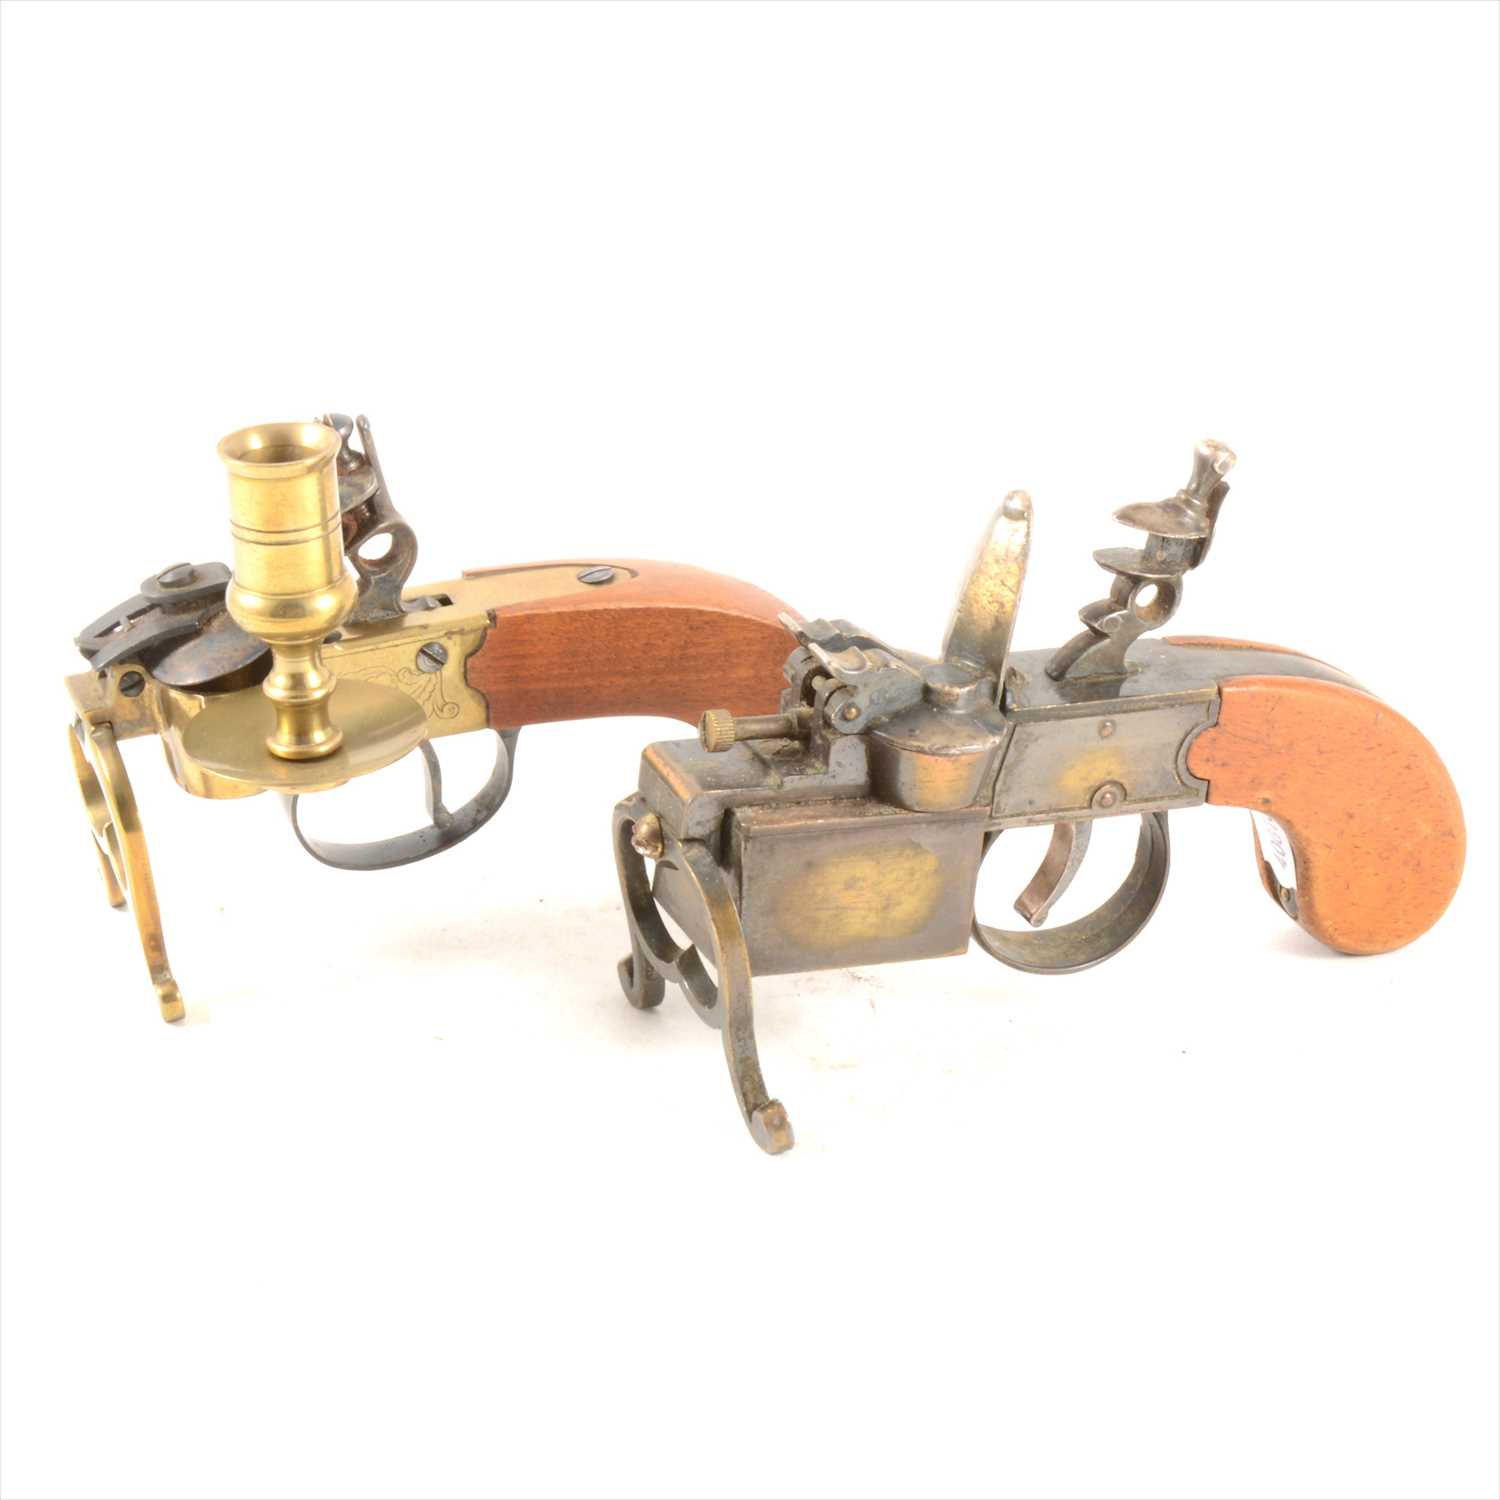 Lot 215 - A Dunhill 'Tinder Pistol' table cigarette lighter, in the shape of a boxlock Flintlock pistol, 15cm, and another similar with brass candlestic mount.